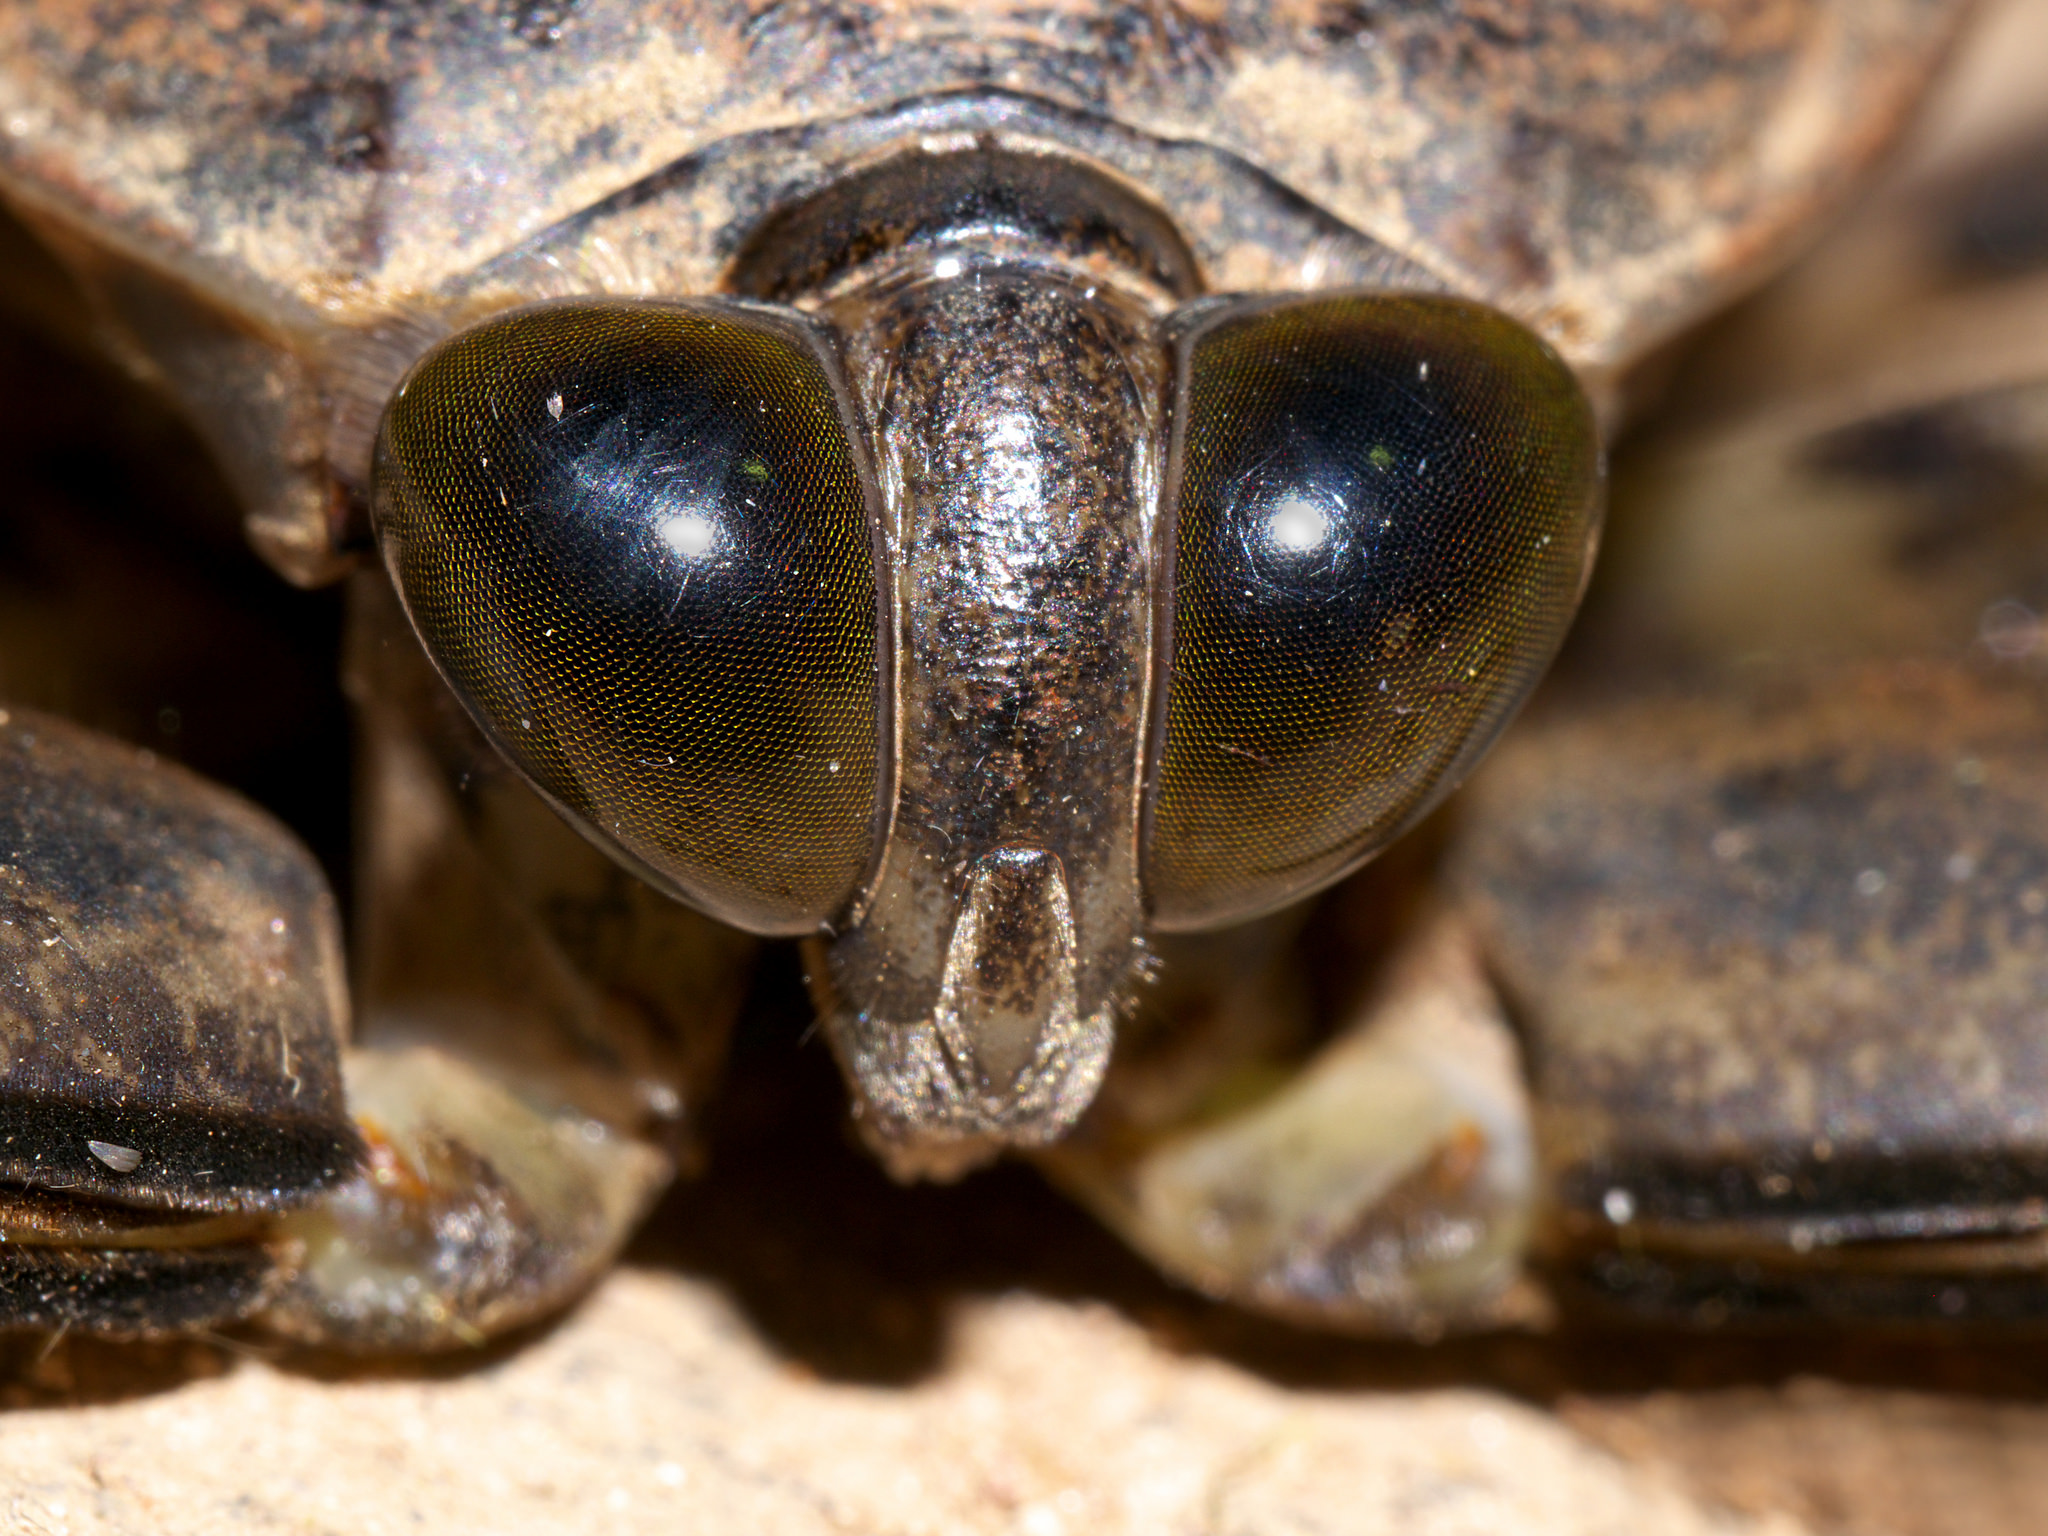 The Electric-Light-Loving, Scuba-Diving, Toe-Biting, Giant Water Bug